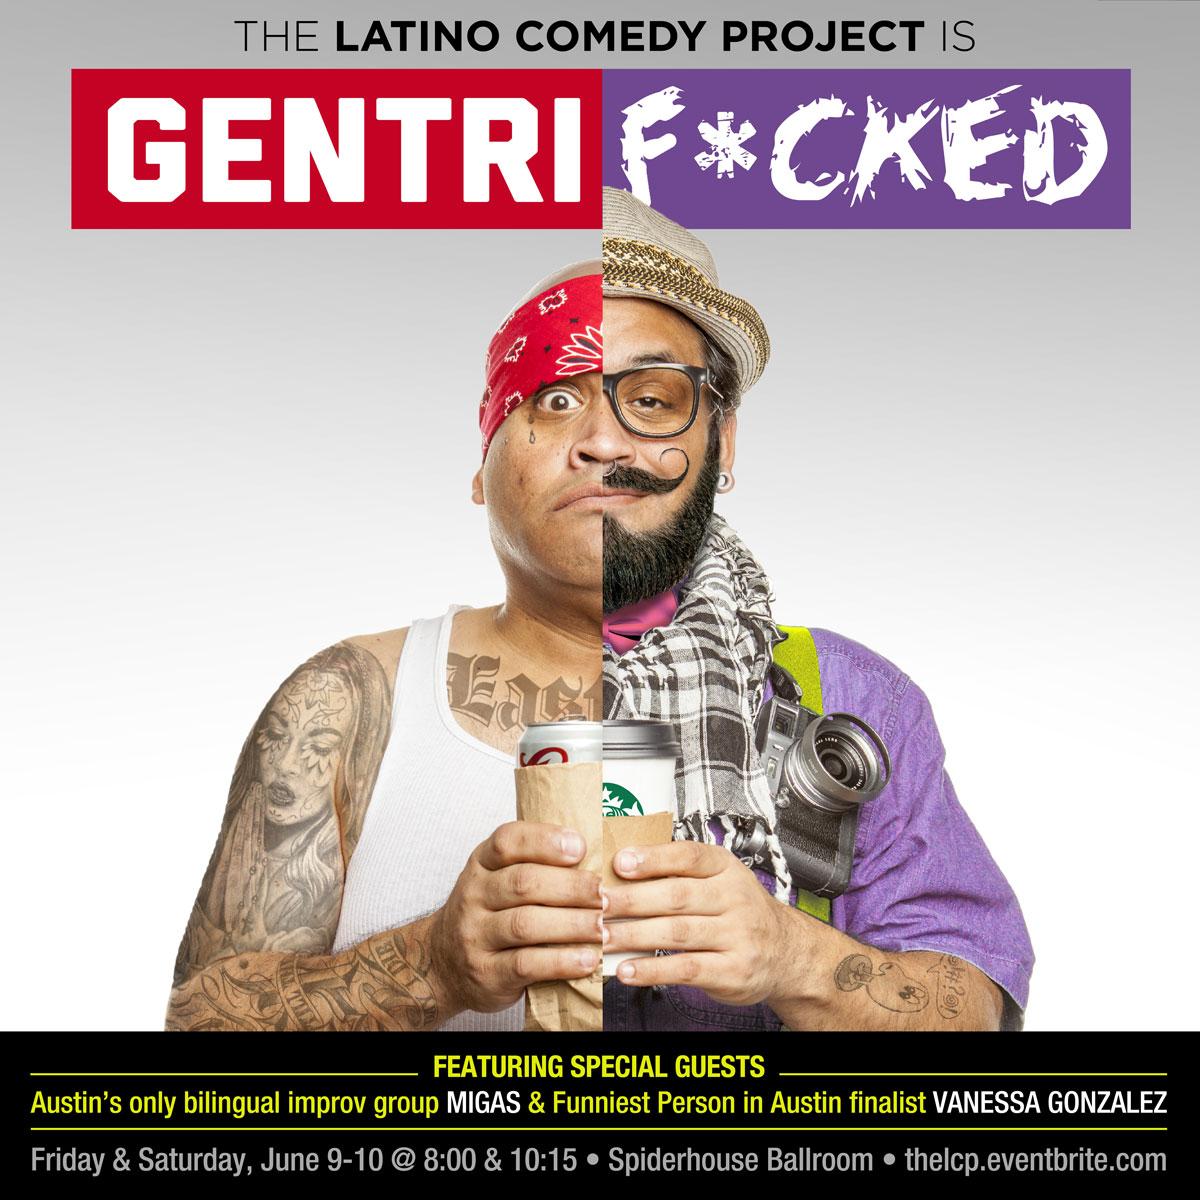 Gentrif*cked by Latino Comedy Project